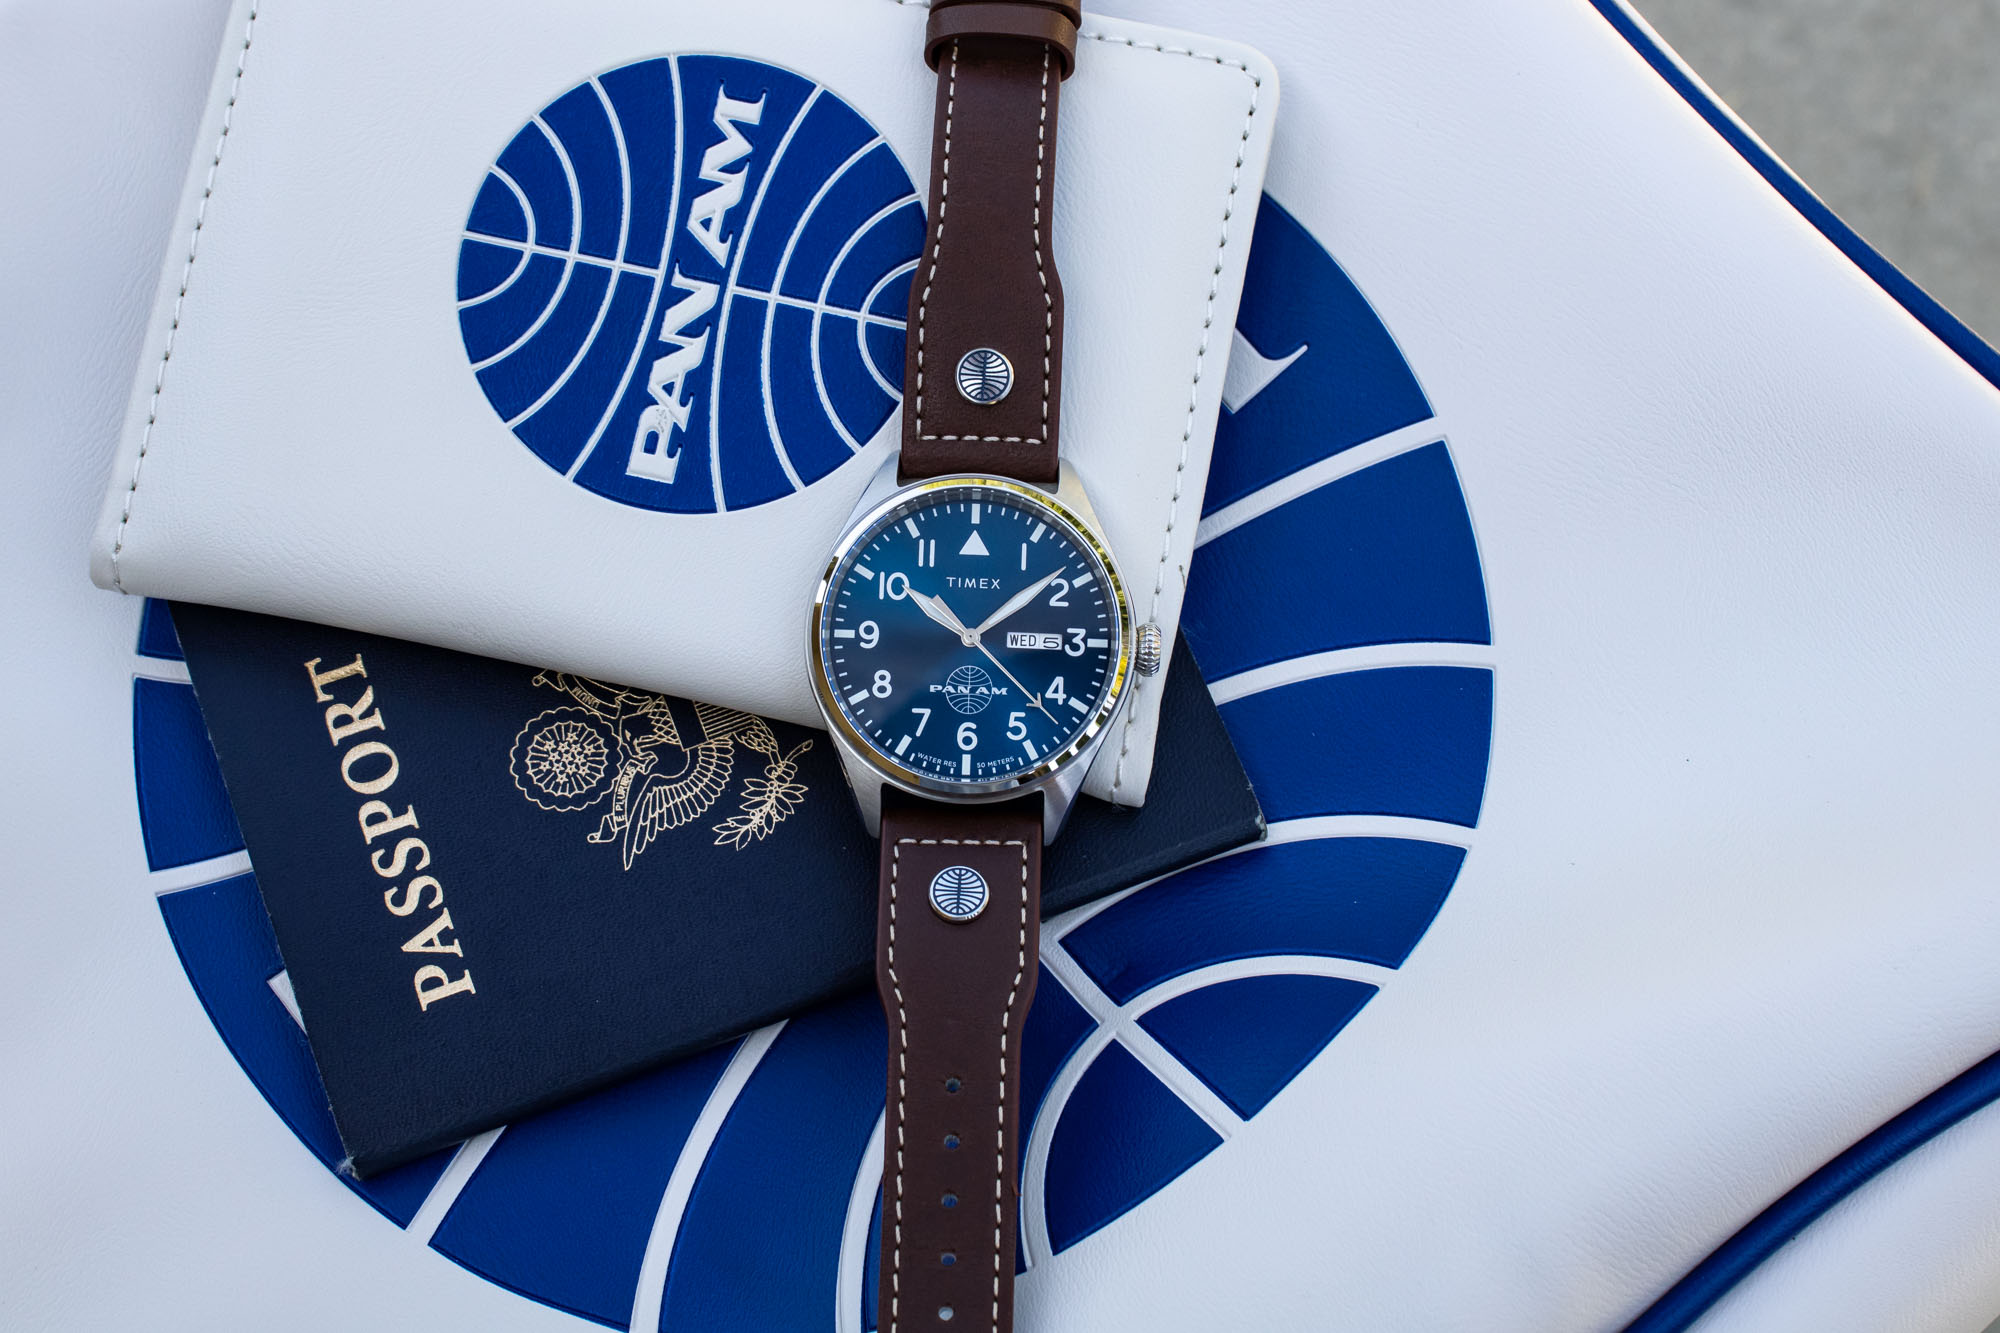 Hands-On: Timex x Pan Am Day-Date Watch | aBlogtoWatch